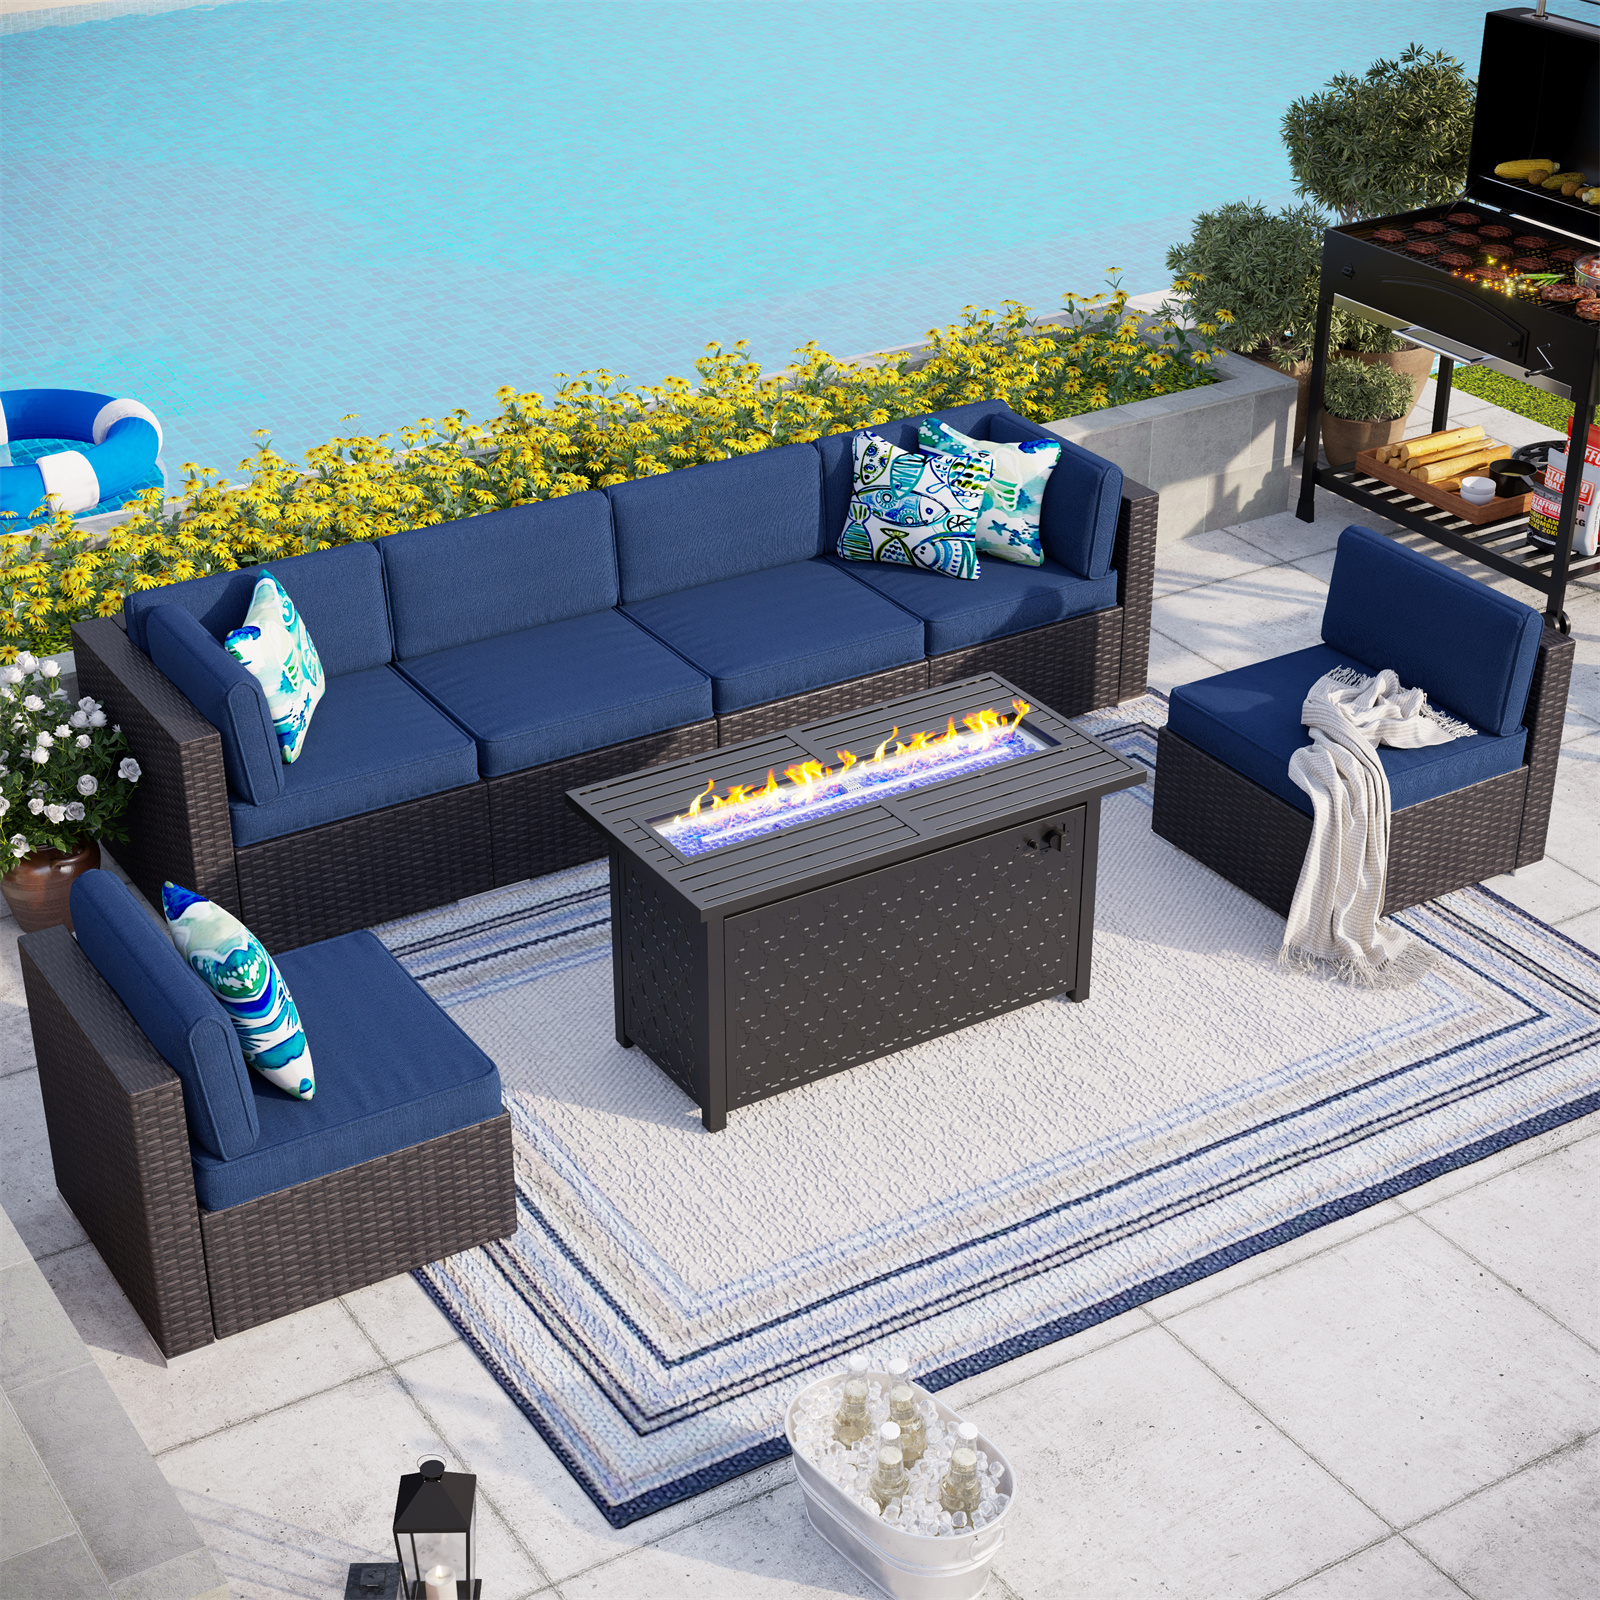 MF Studio 7 PCS Outdoor Patio Furniture Set with 45-Inch 50,000 BTU Fire Pit Table Patio Conversation Set with Navy Blue Cushions - image 1 of 12